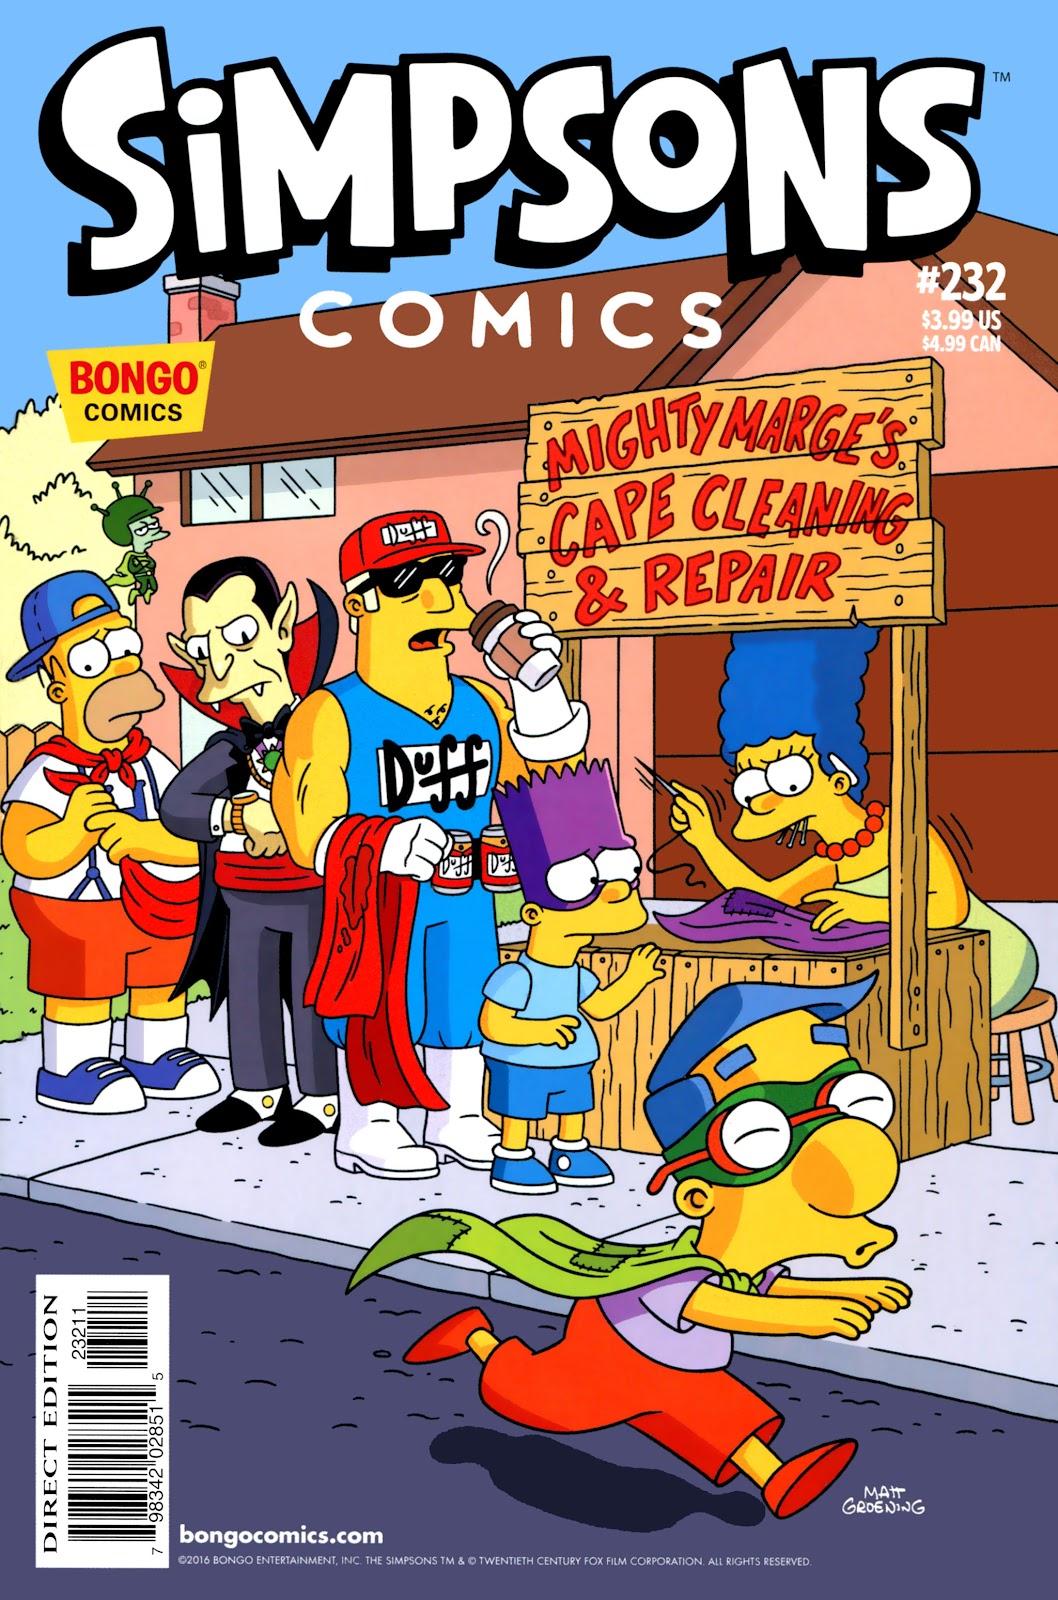 Simpsons Comics issue 232 - Page 1